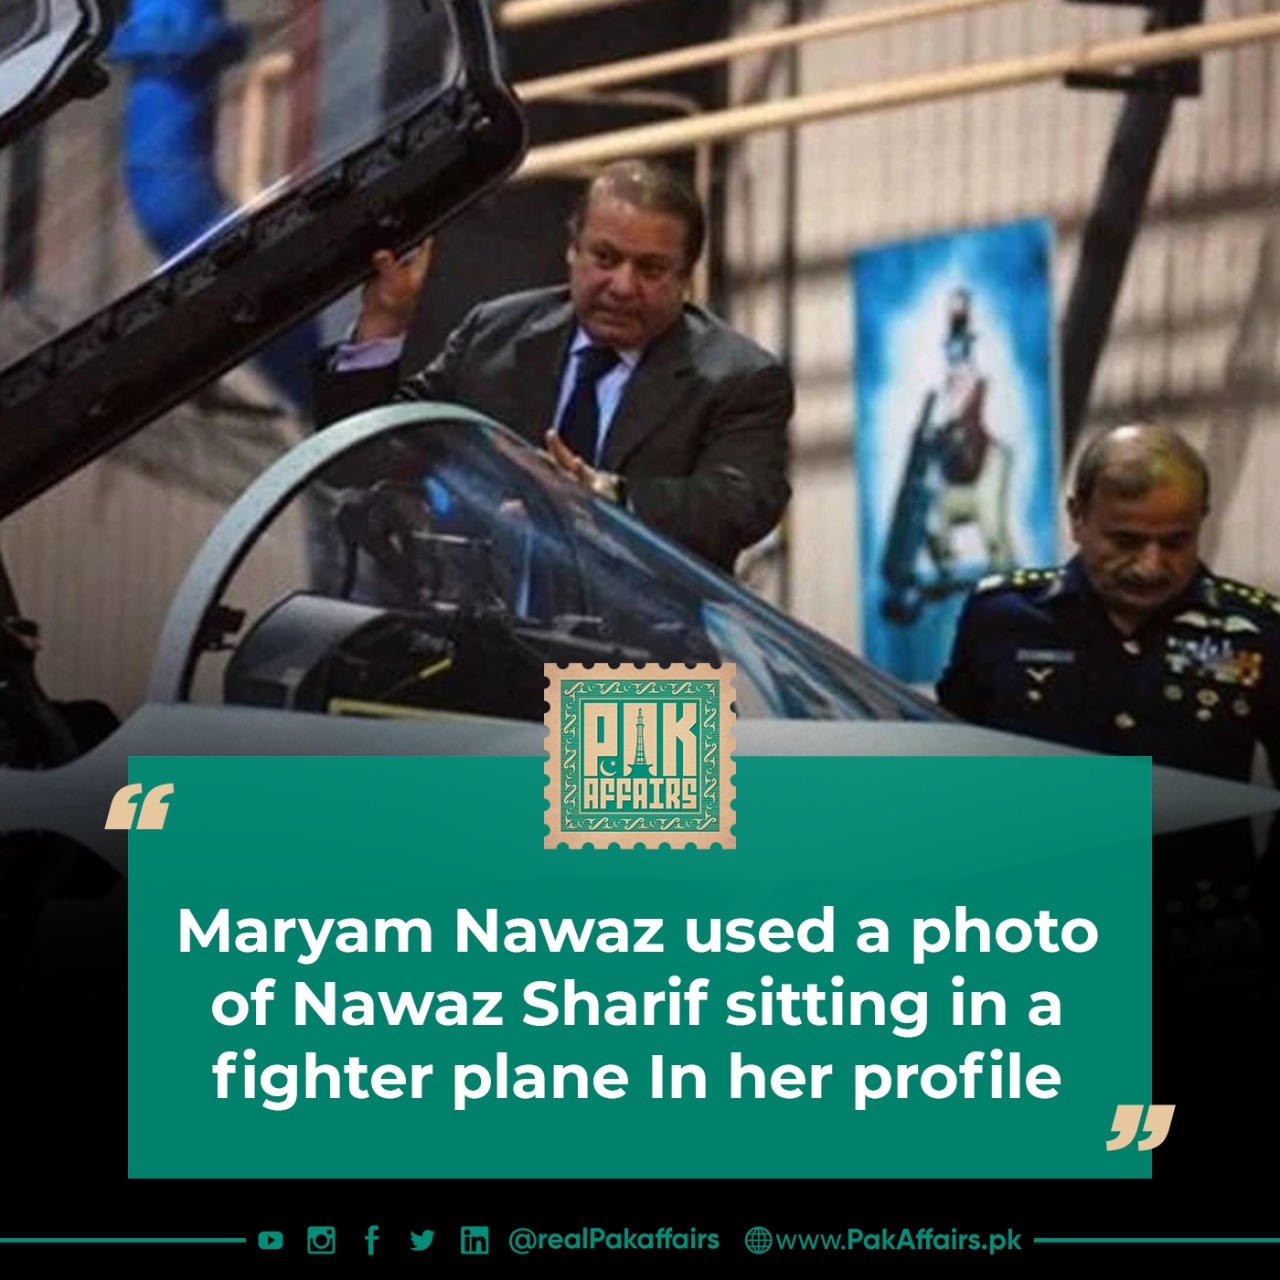 Maryam Nawaz used a photo of Nawaz Sharif sitting in a fighter plane In her profile